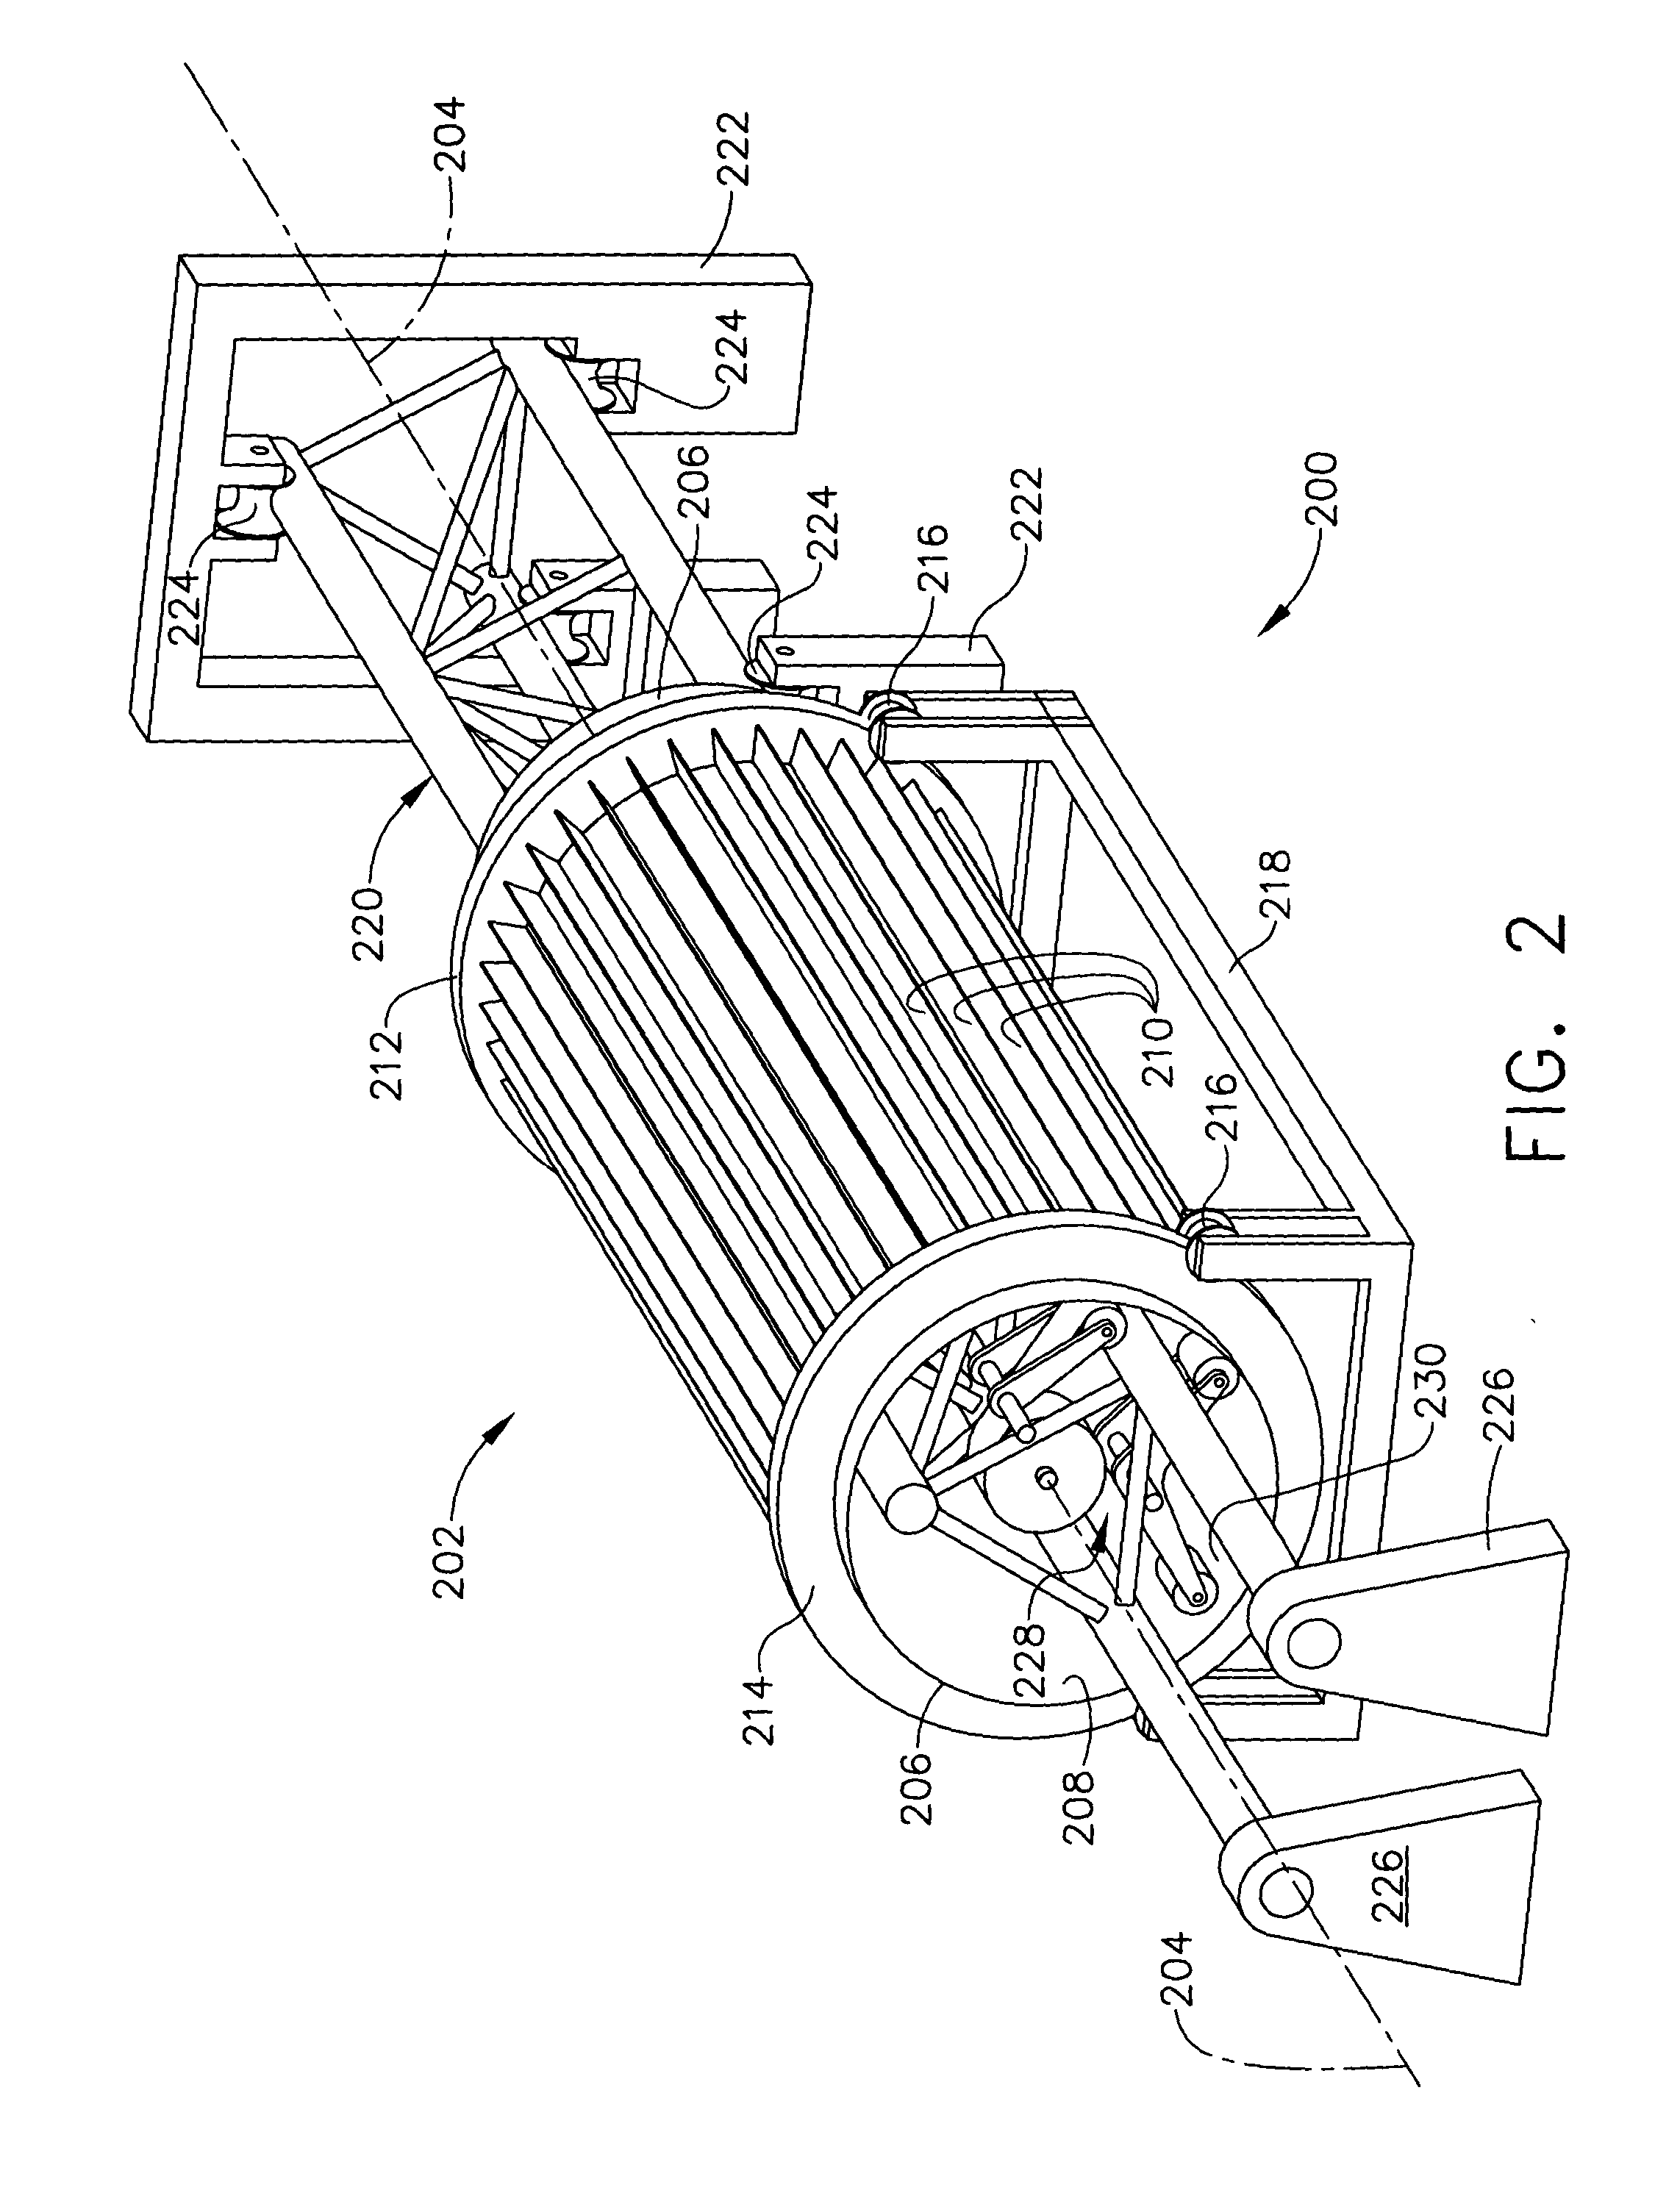 Automated composite lay-up to an internal fuselage mandrel